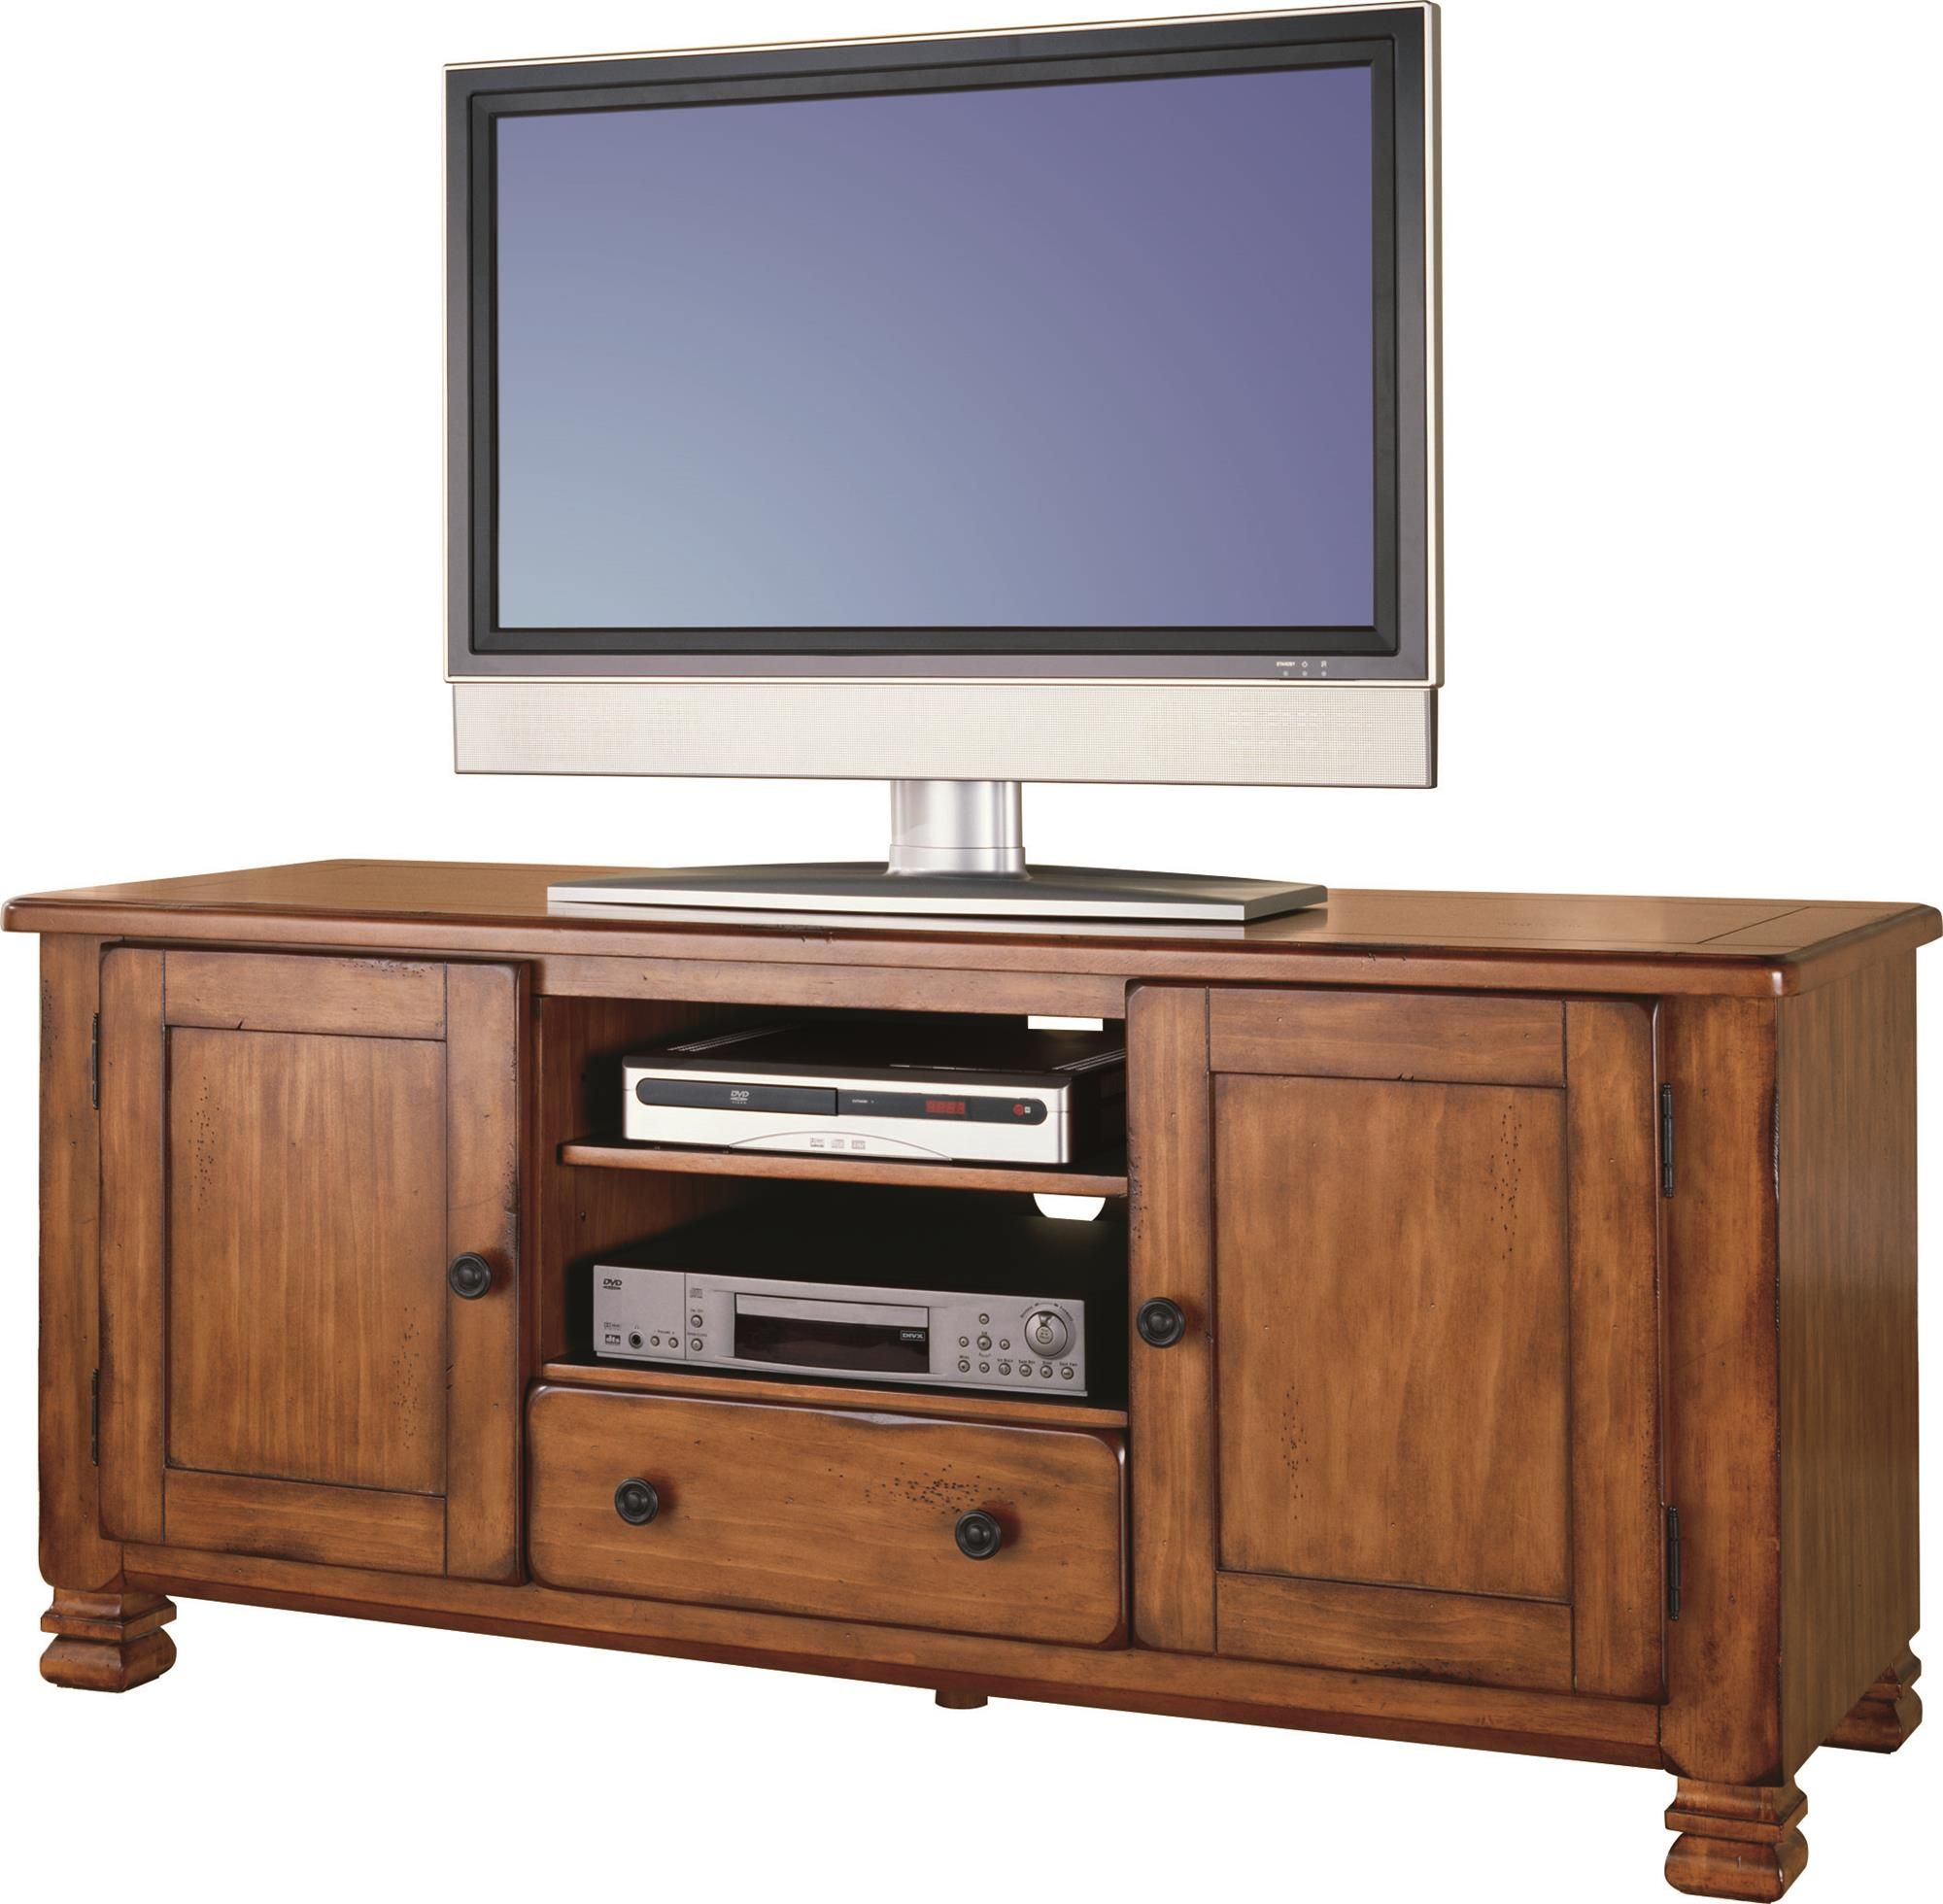 Ameriwood Home Summit Mountain Wood Veneer Tv Stand For In Indi Wide Tv Stands (View 2 of 15)